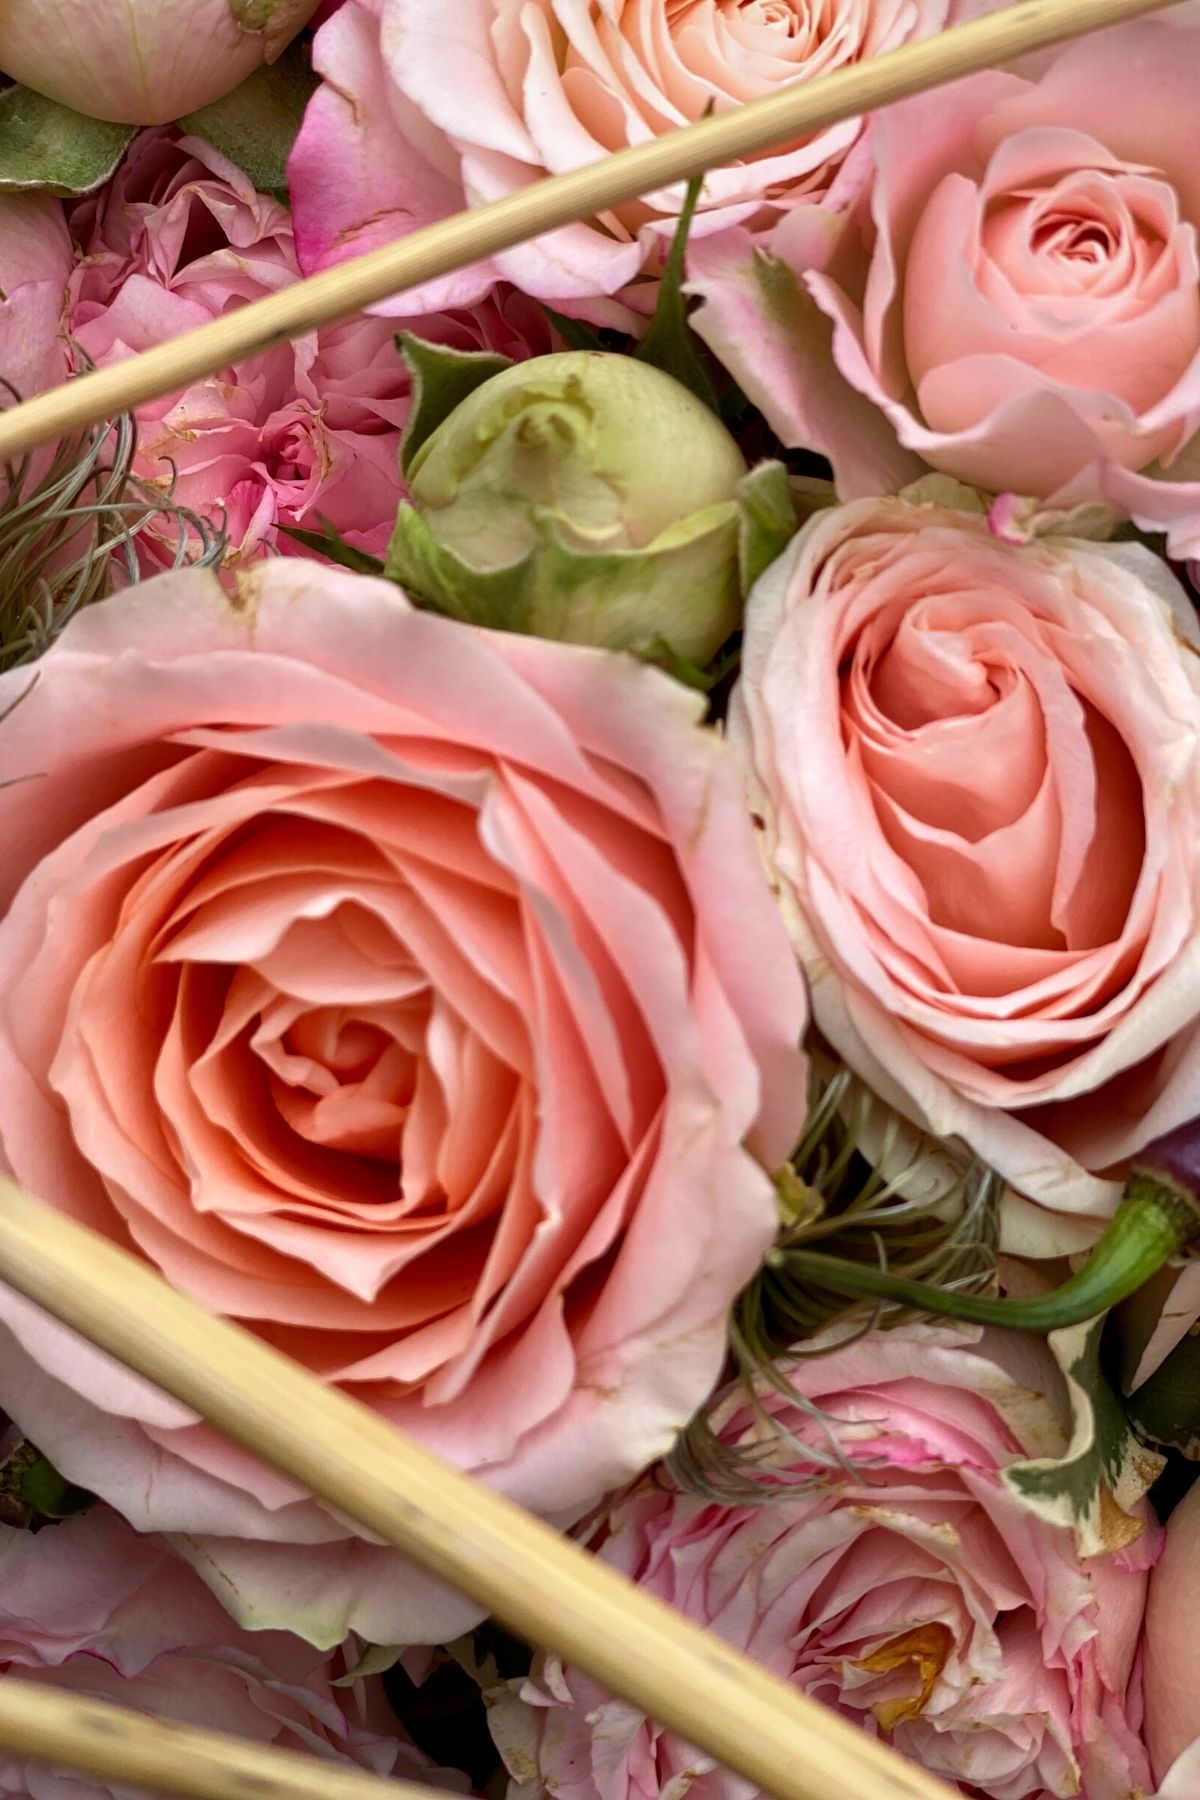 For the Love of a Rose, the Florist Is the Servant of a Thousand Thorns - Article on Thursd (20)